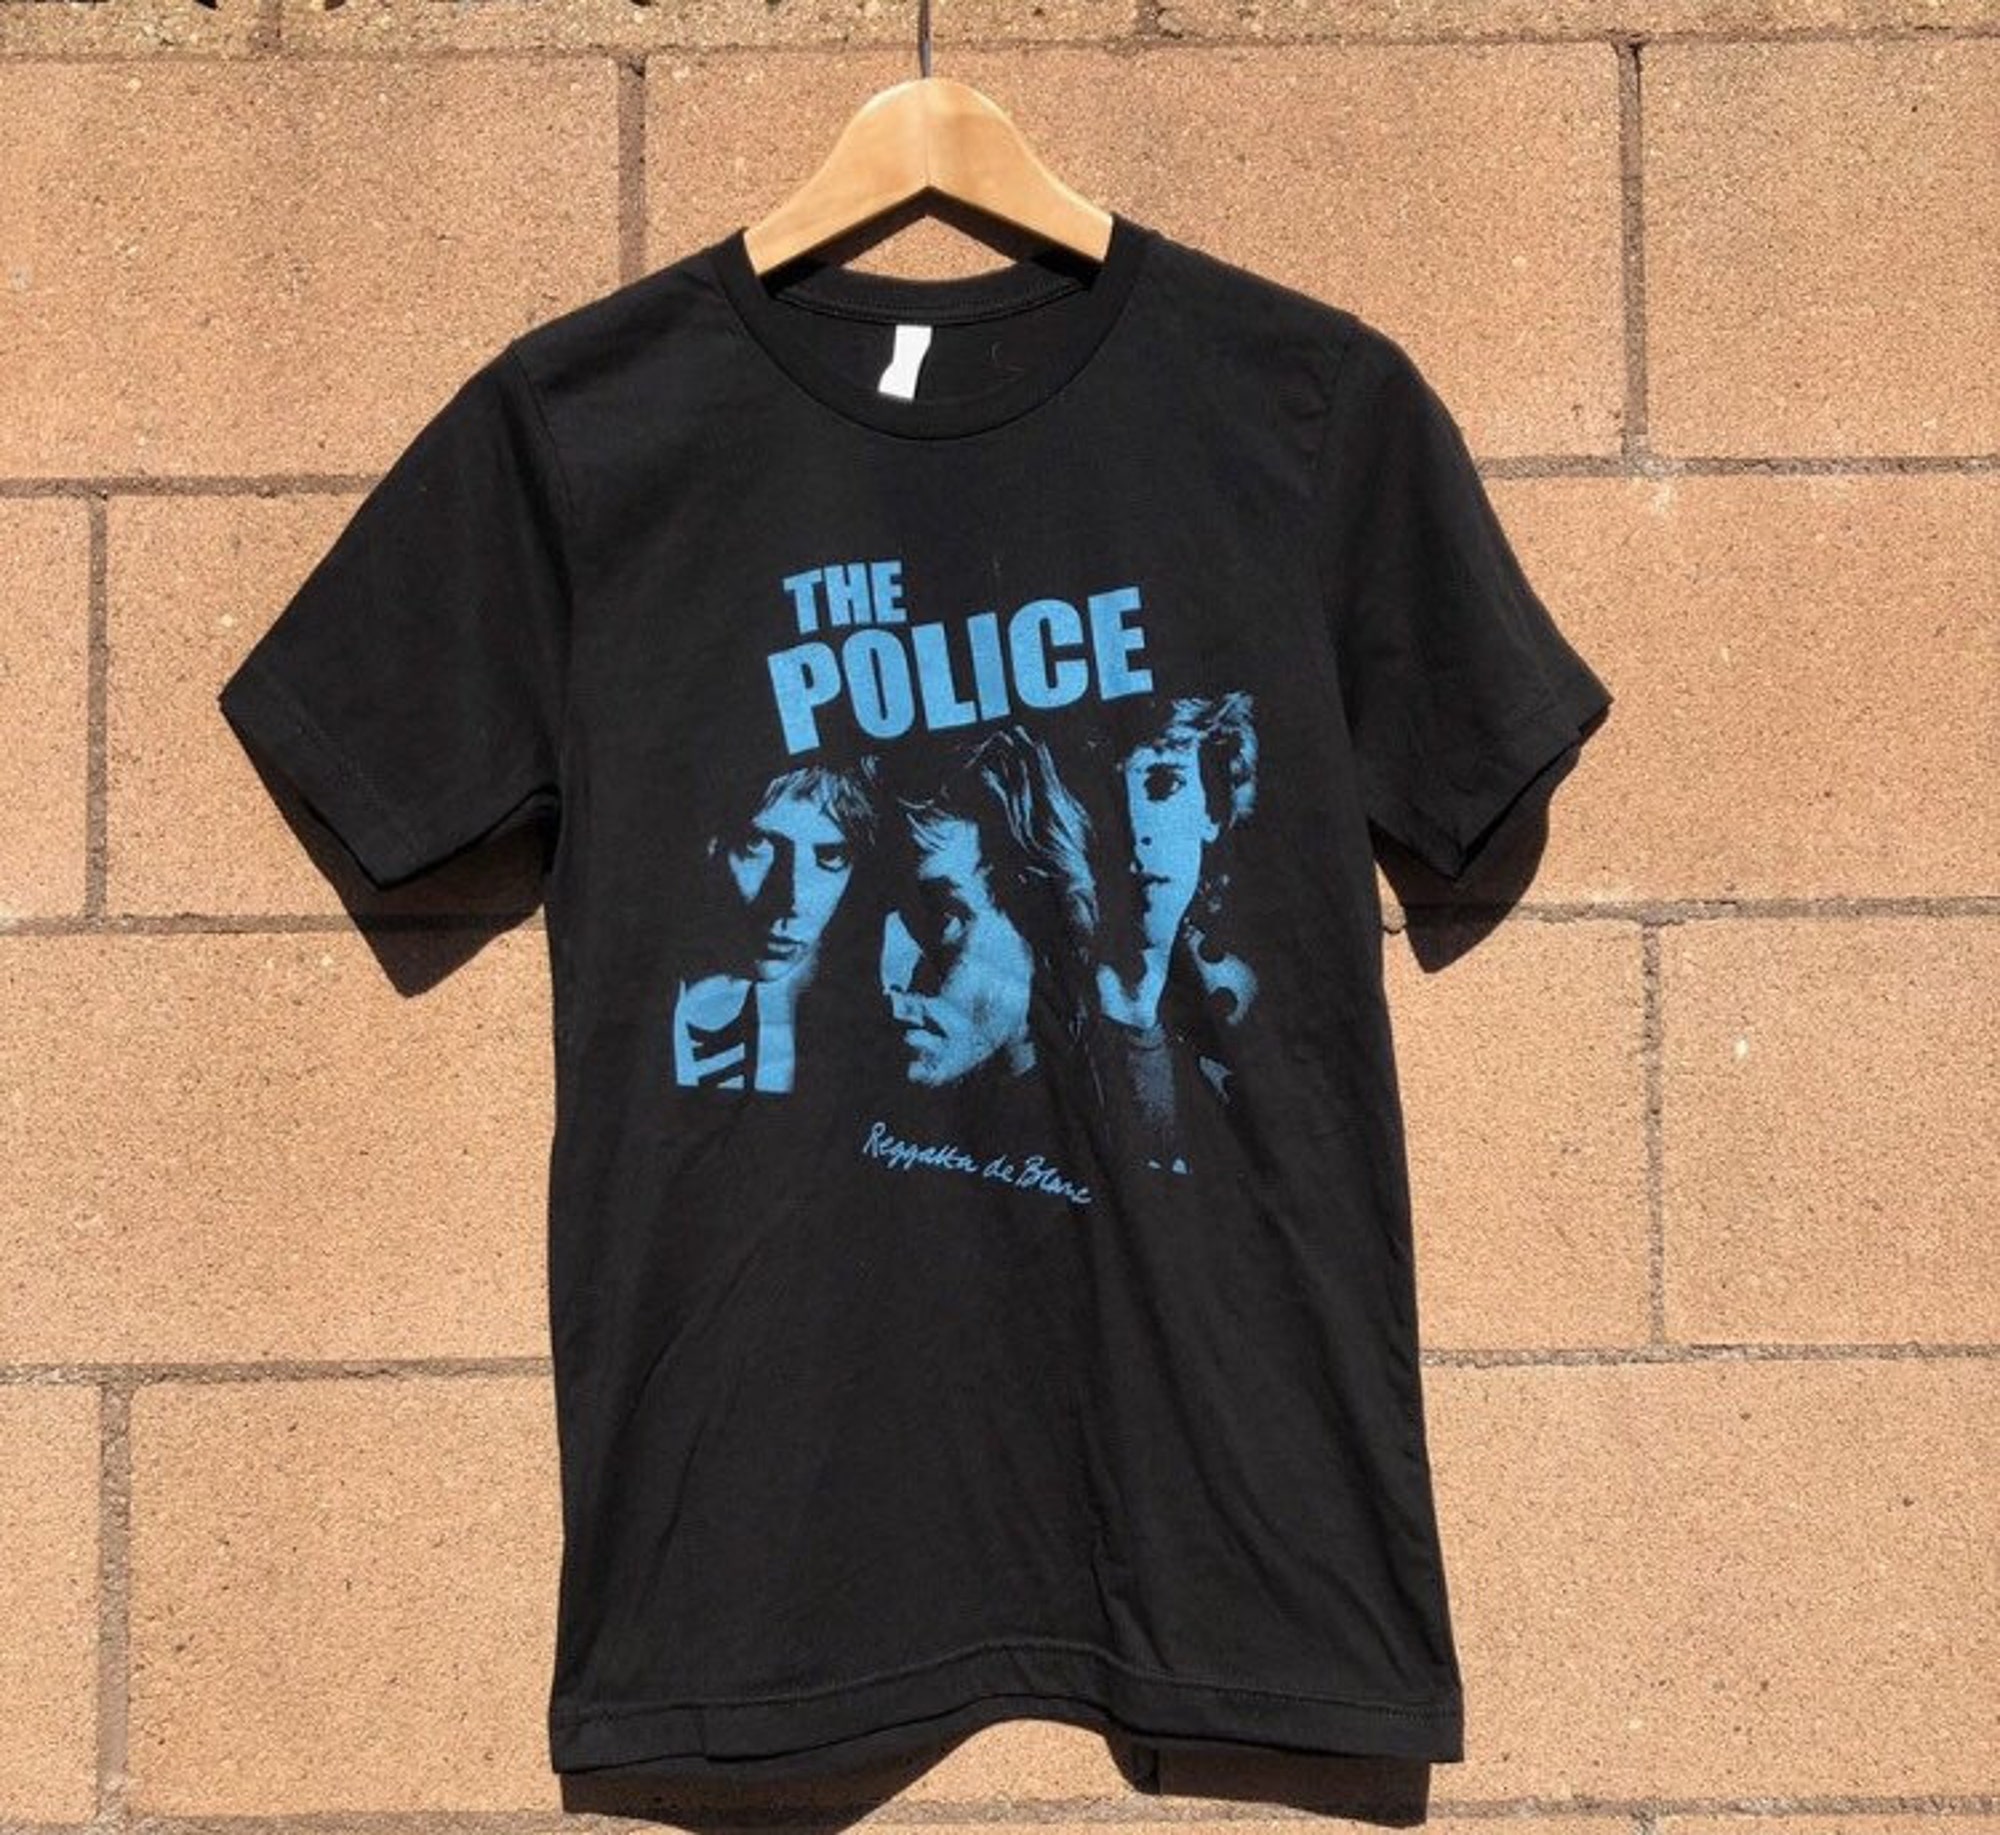 Discover The Police band tee